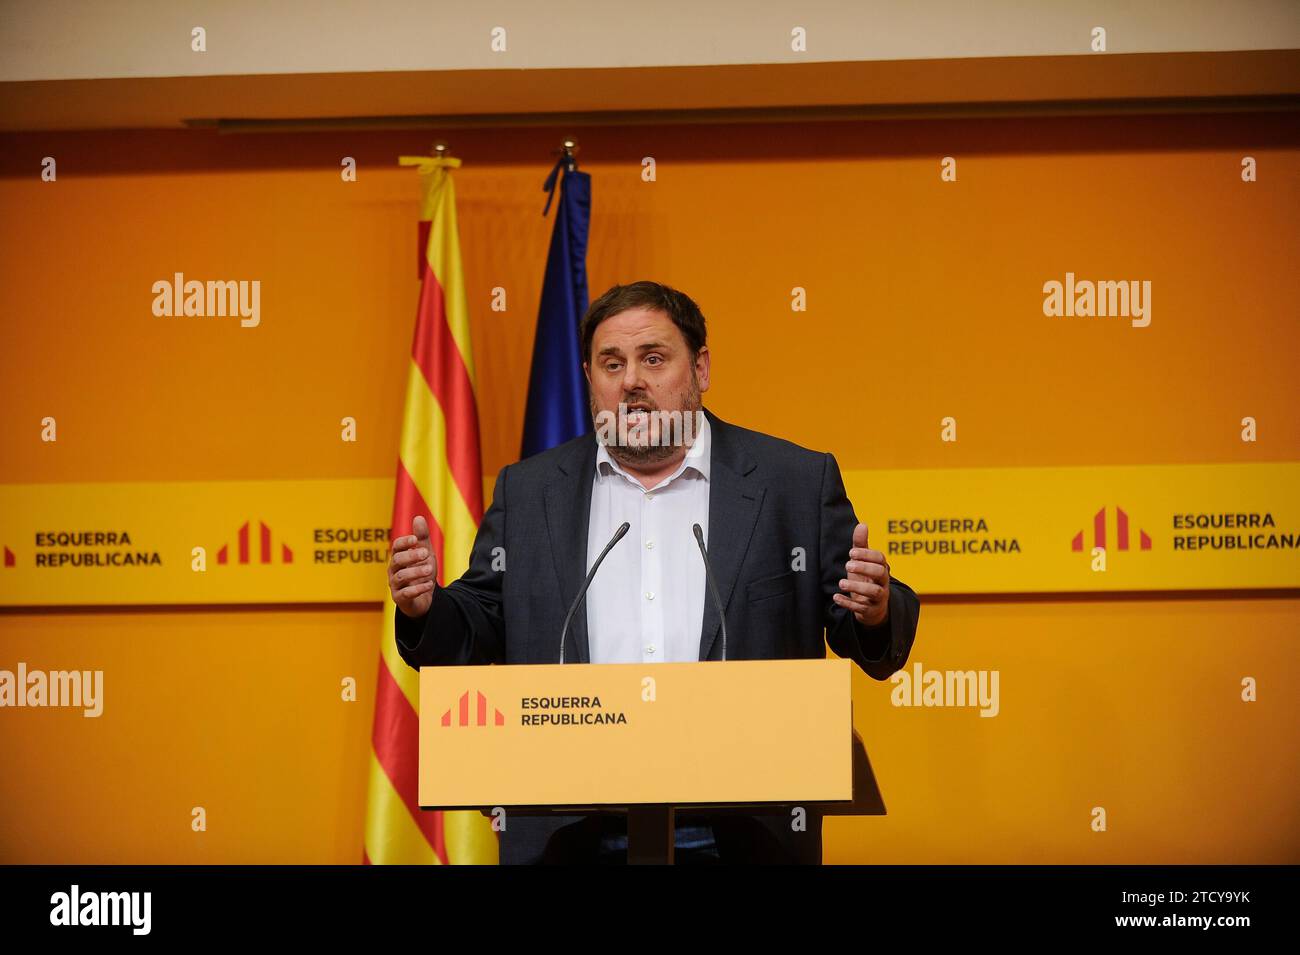 Barcelona, 01/04/2016. Press conference by Oriol Junqueras, after the extraordinary executive meeting of ERC. Photo: Ines Baucells ARCHDC. Credit: Album / Archivo ABC / Inés Baucells Stock Photo